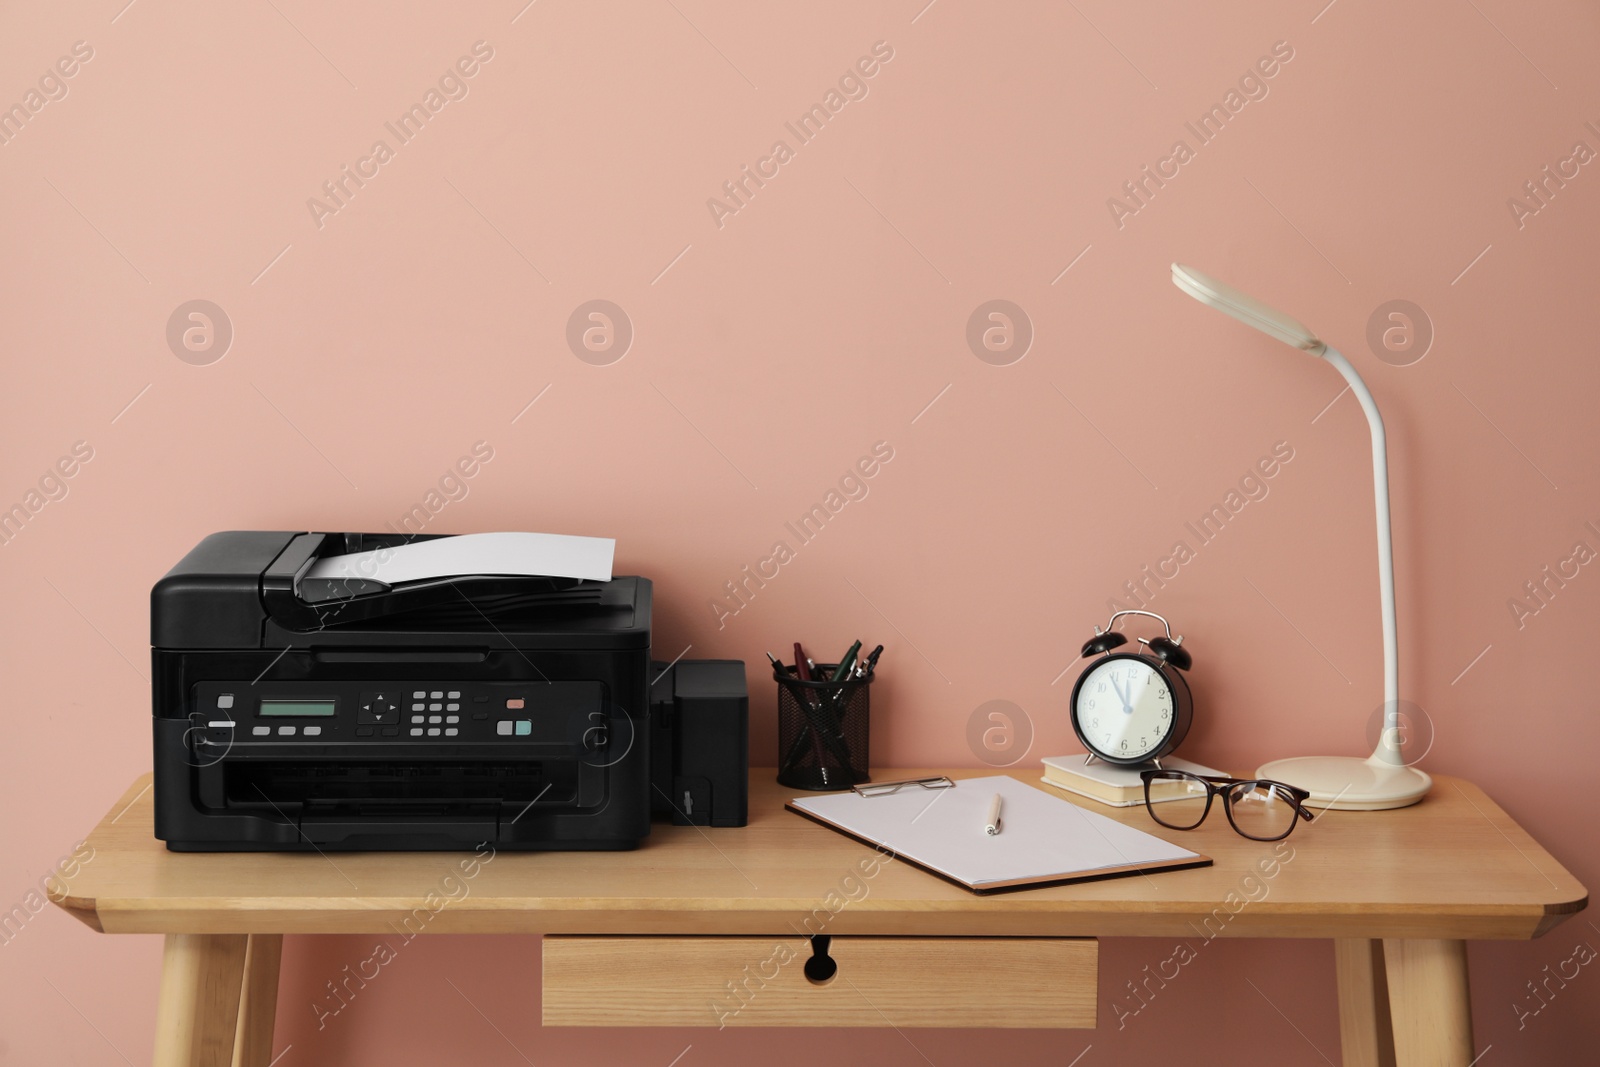 Photo of New modern printer and office supplies on wooden table